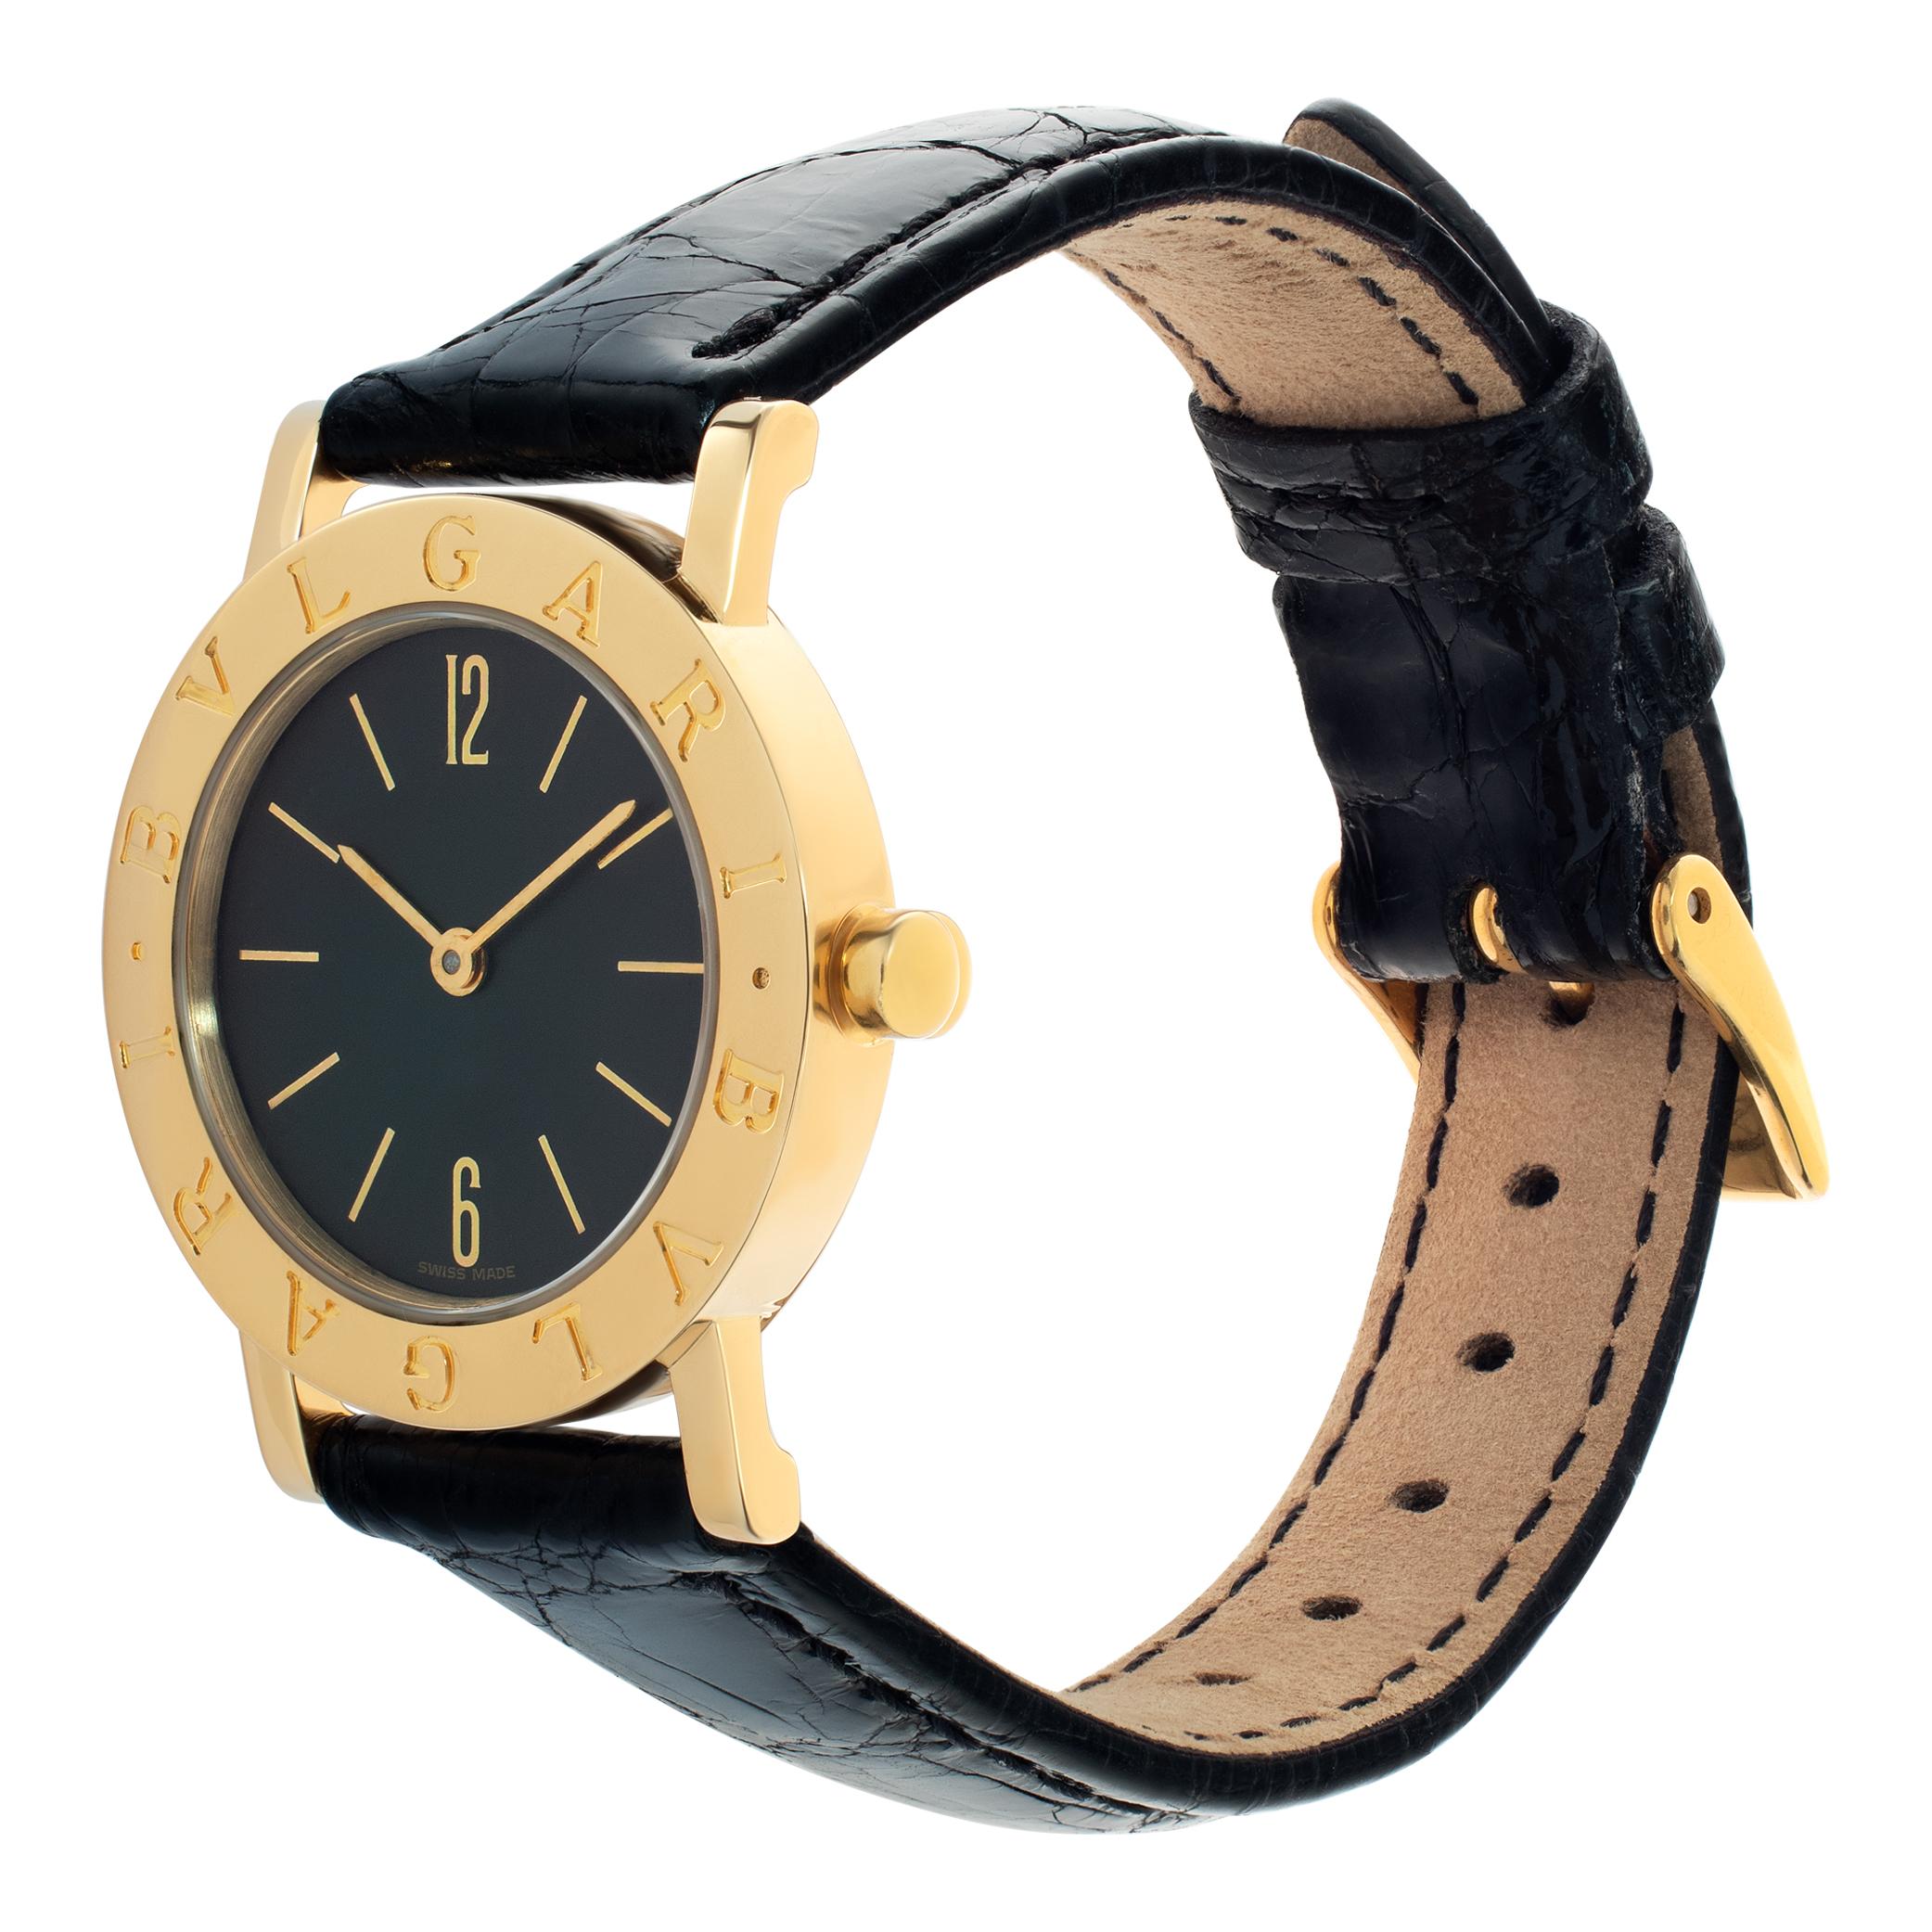 Bvlgari Bvlgari in 18k on leather strap. Quartz. 26 mm case size. Ref bb26gl. Fine Pre-owned Bvlgari / Bulgari Watch.

 Certified preowned Classic Bvlgari Bvlgari bb26gl watch is made out of yellow gold on a Black Leather strap with a Gold Plate